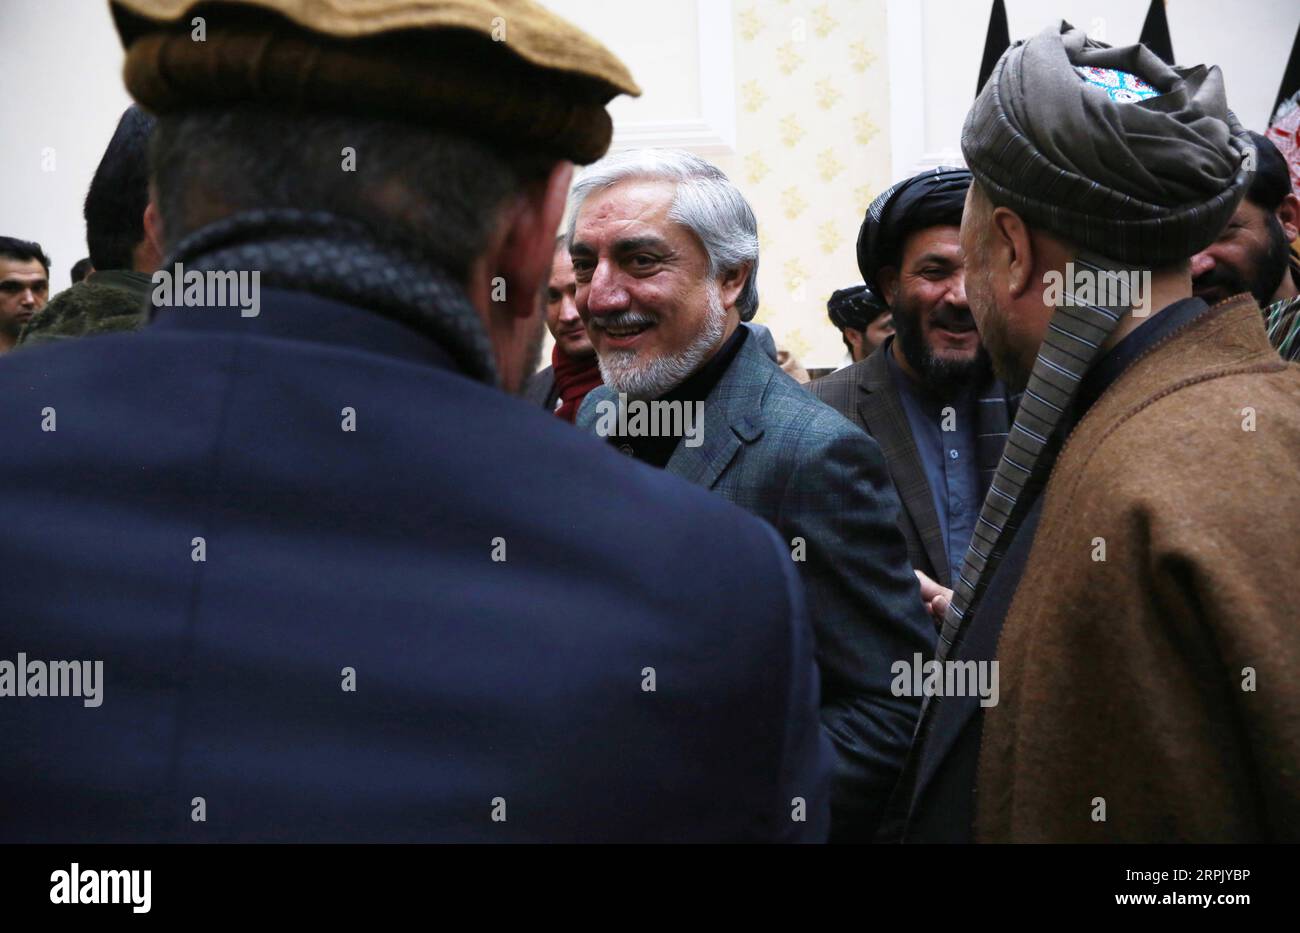 191222 -- KABUL, Dec. 22, 2019 -- Afghan presidential candidate Abdullah Abdullah C leaves after a press conference in Kabul, capital of Afghanistan, on Dec. 22, 2019. Afghan President Mohammad Ashraf Ghani has welcomed the preliminary results of the presidential election announced on Sunday as fair and expressed his congratulations to the nation and gratitude to the election commission. However, his rival in the presidential race Abdullah Abdullah described it as a fraudulent practice and vowed to fight through legal means until the fake votes were separated from the legitimate ones.  AFGHANI Stock Photo